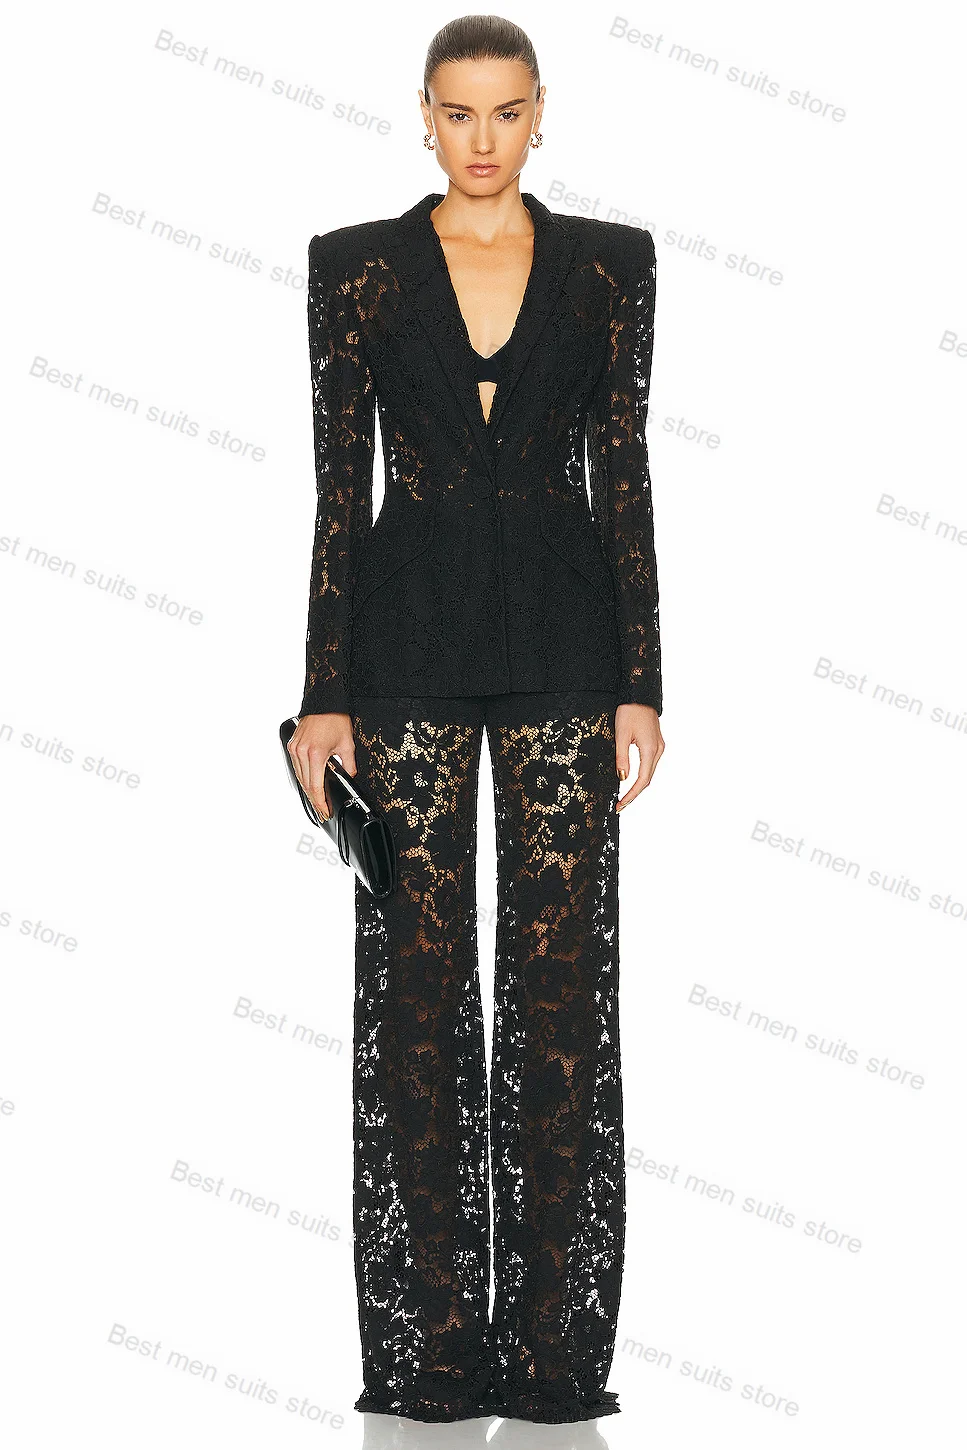 

Black Lace Women Suit Set Blazer+Straight Pants 2 Piece See Through Wedding Tuxedo Party Jacket Tailored Formal Office Lady Coat